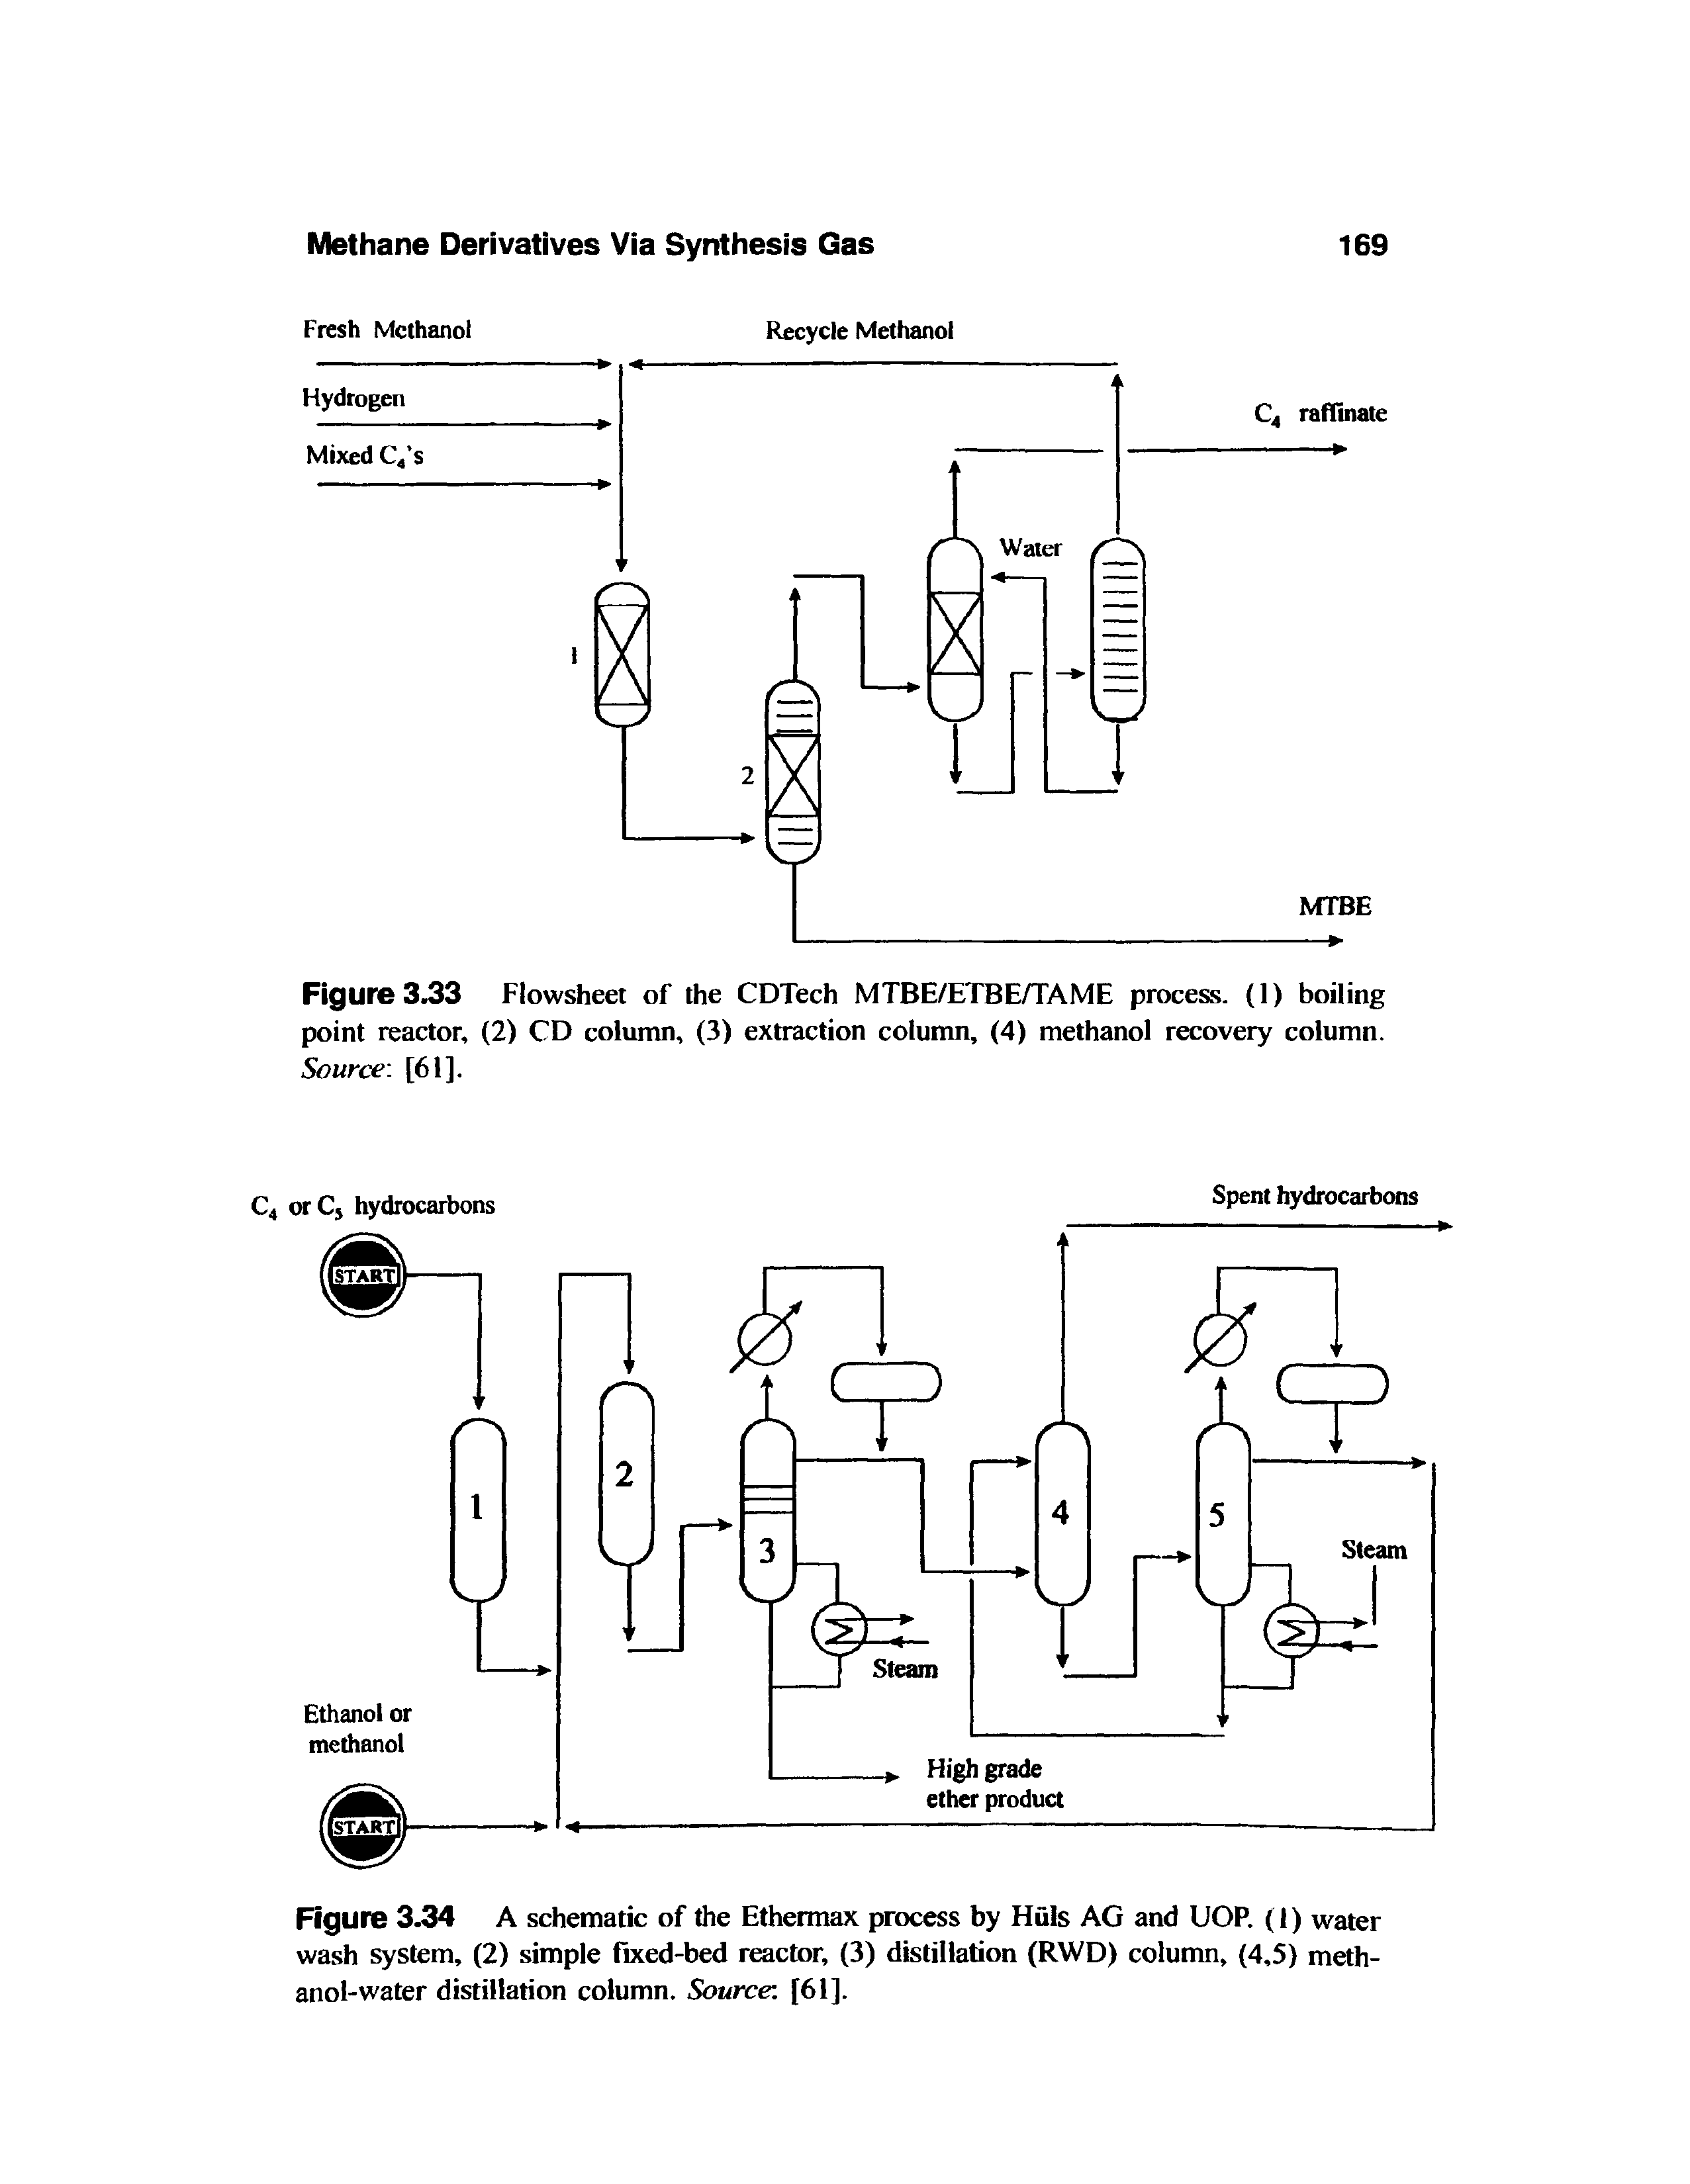 Figure 3.33 Flowsheet of the CDTech MTBE/ETBE/TAME process. (1) boiling point reactor, (2) CD column, (3) extraction column, (4) methanol recovery column. Source [61].